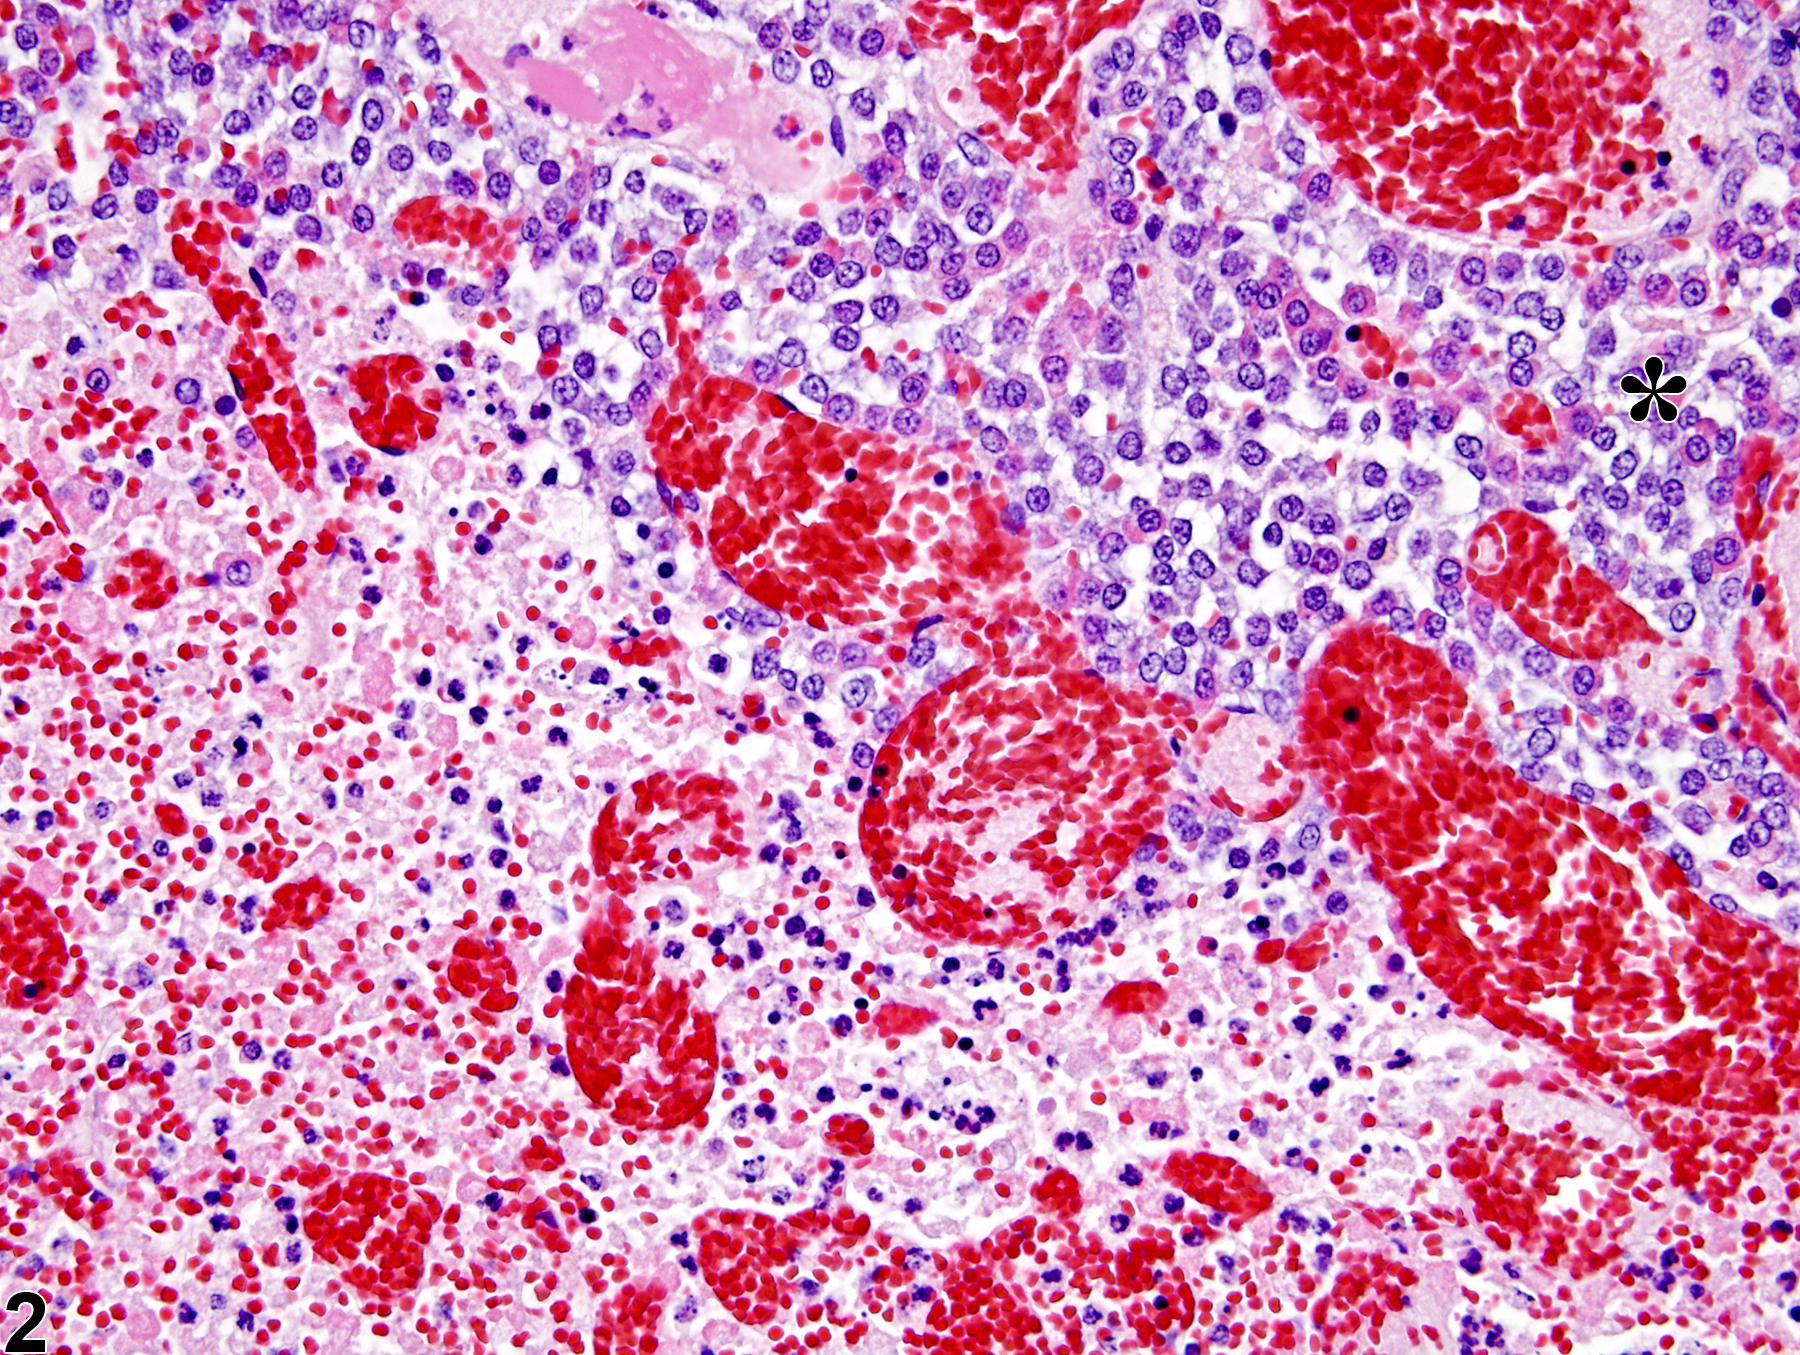 Image of pars distalis necrosis in the pituitary gland from a female F344/N rat in a subchronic study